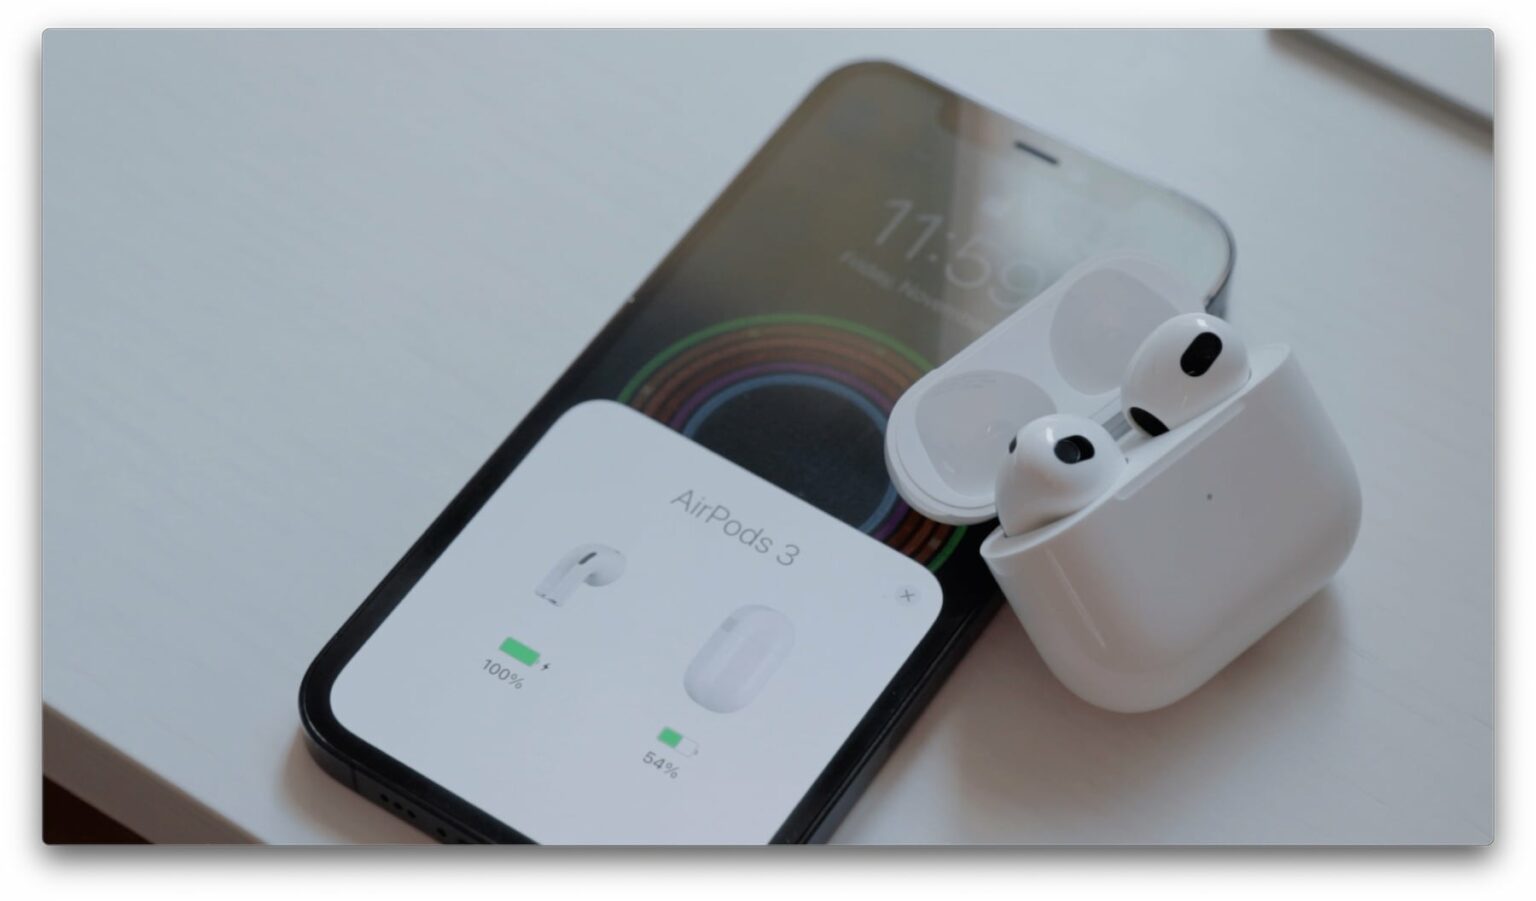 AirPods 3 pairing with iPhone